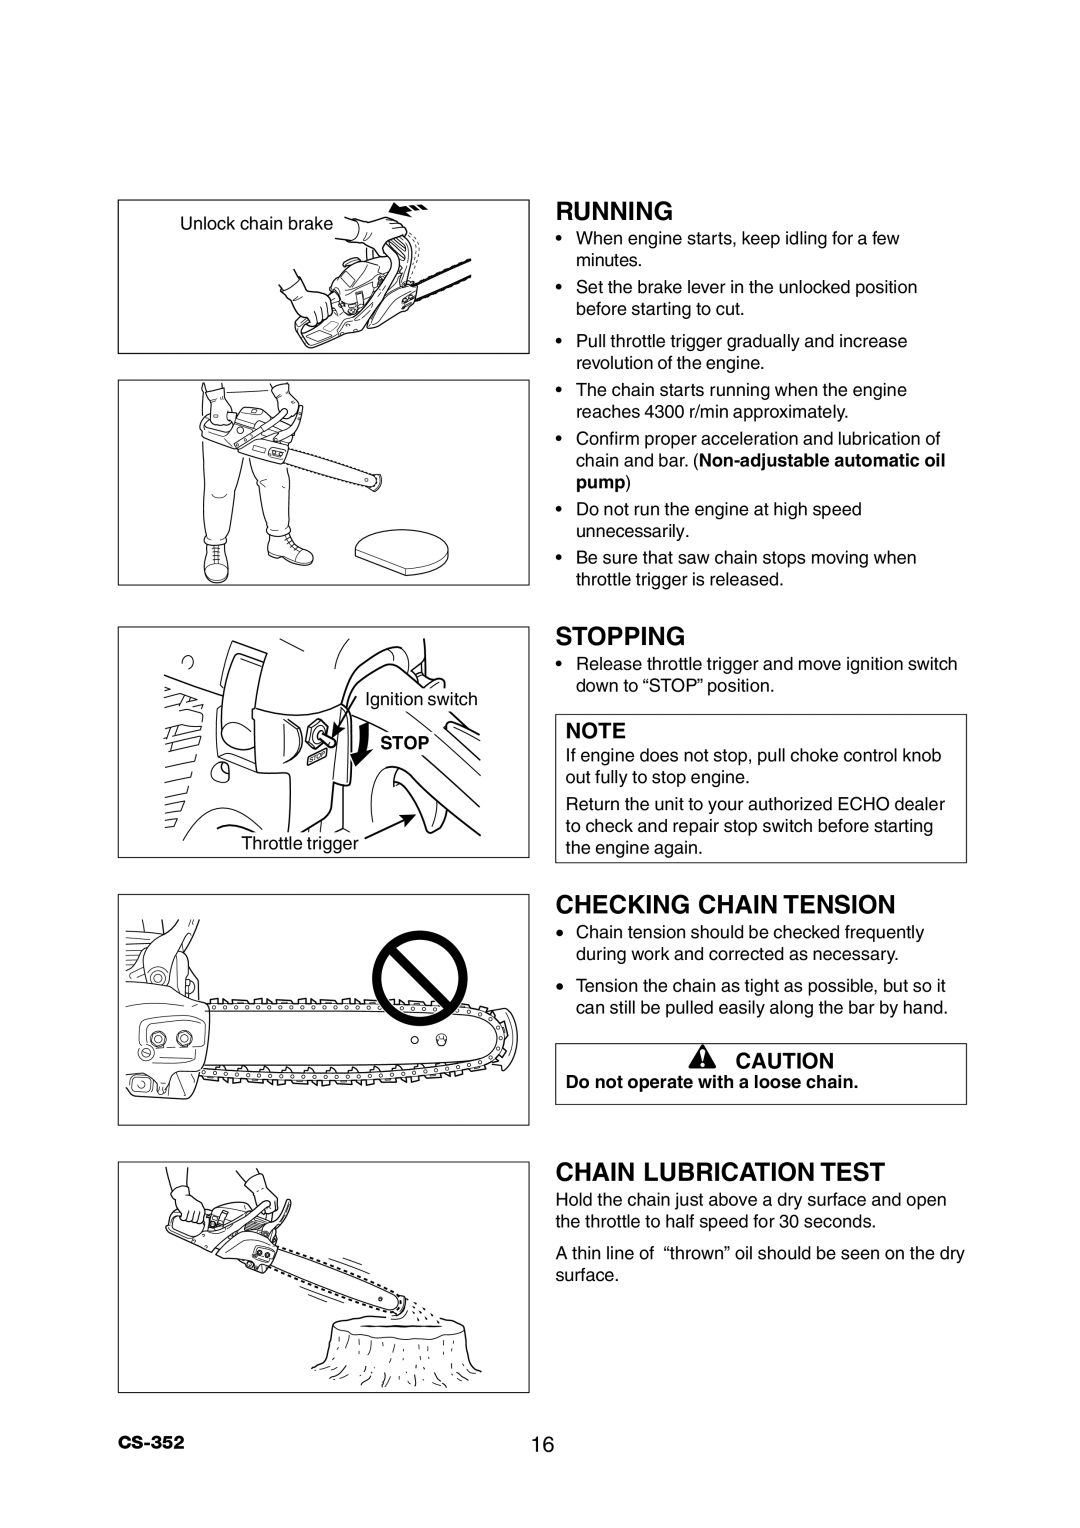 Echo CS-352 instruction manual Running, Stopping, Checking Chain Tension, Chain Lubrication Test 